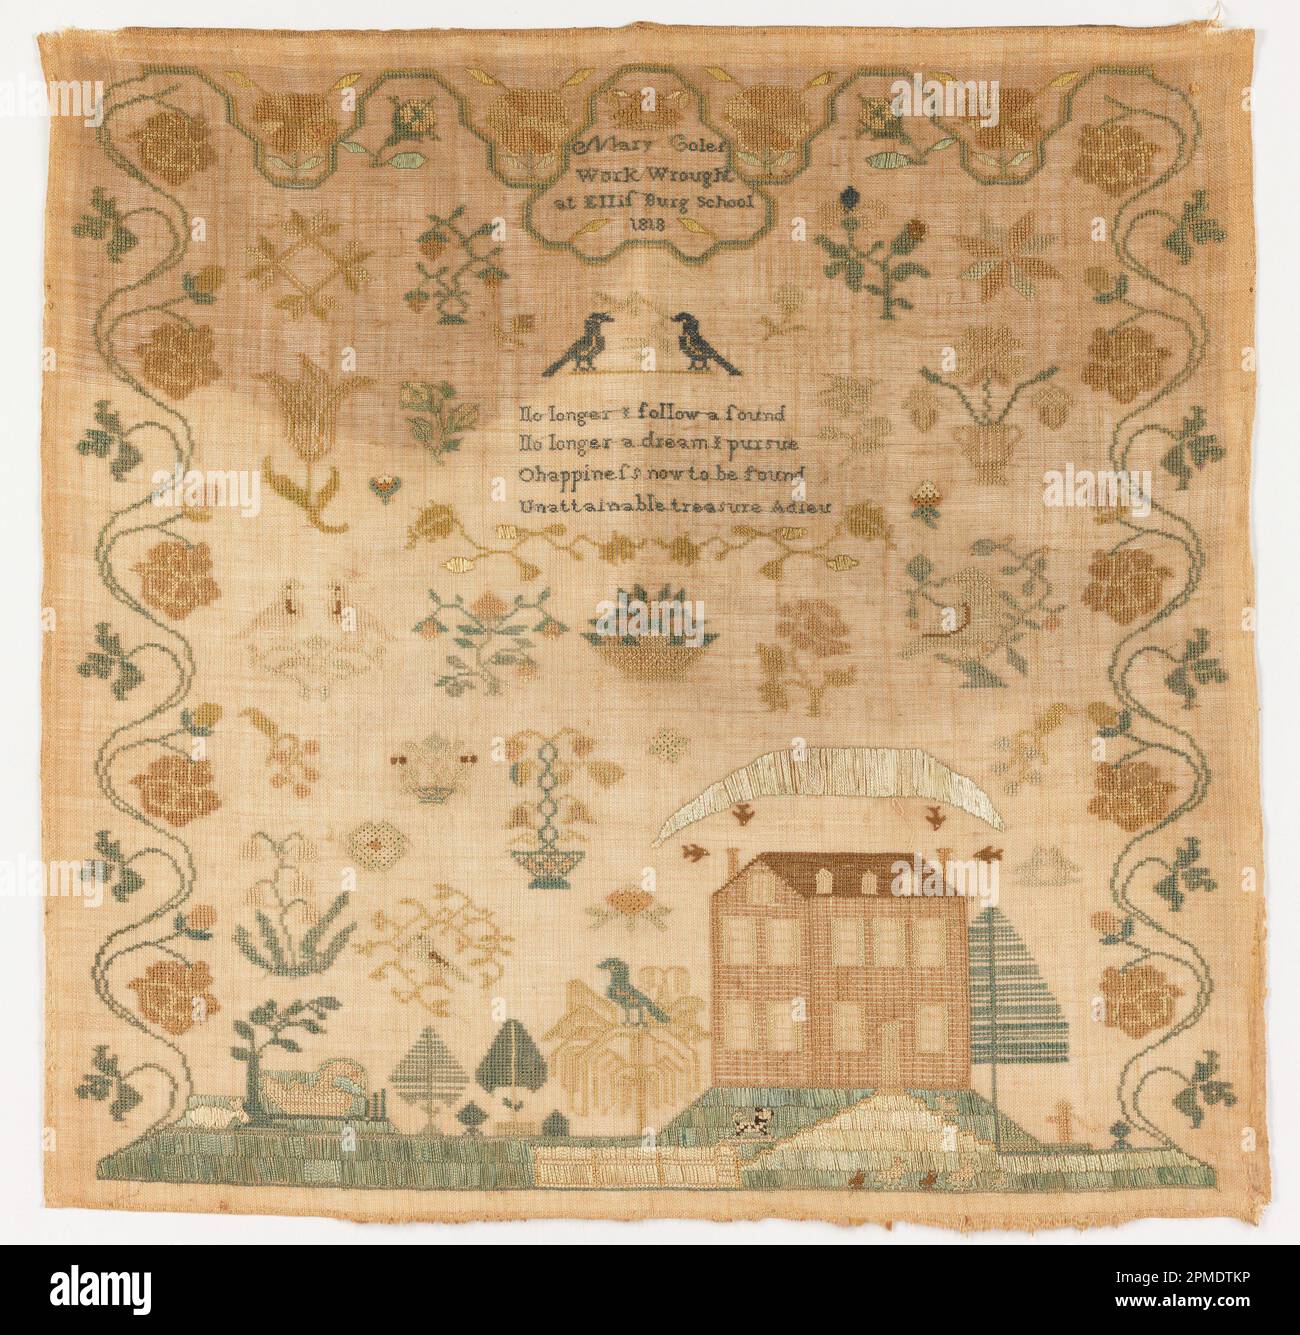 Sampler (USA); Embroidered by Mary Cole (American); Student at Ellisburg School; silk embroidery on linen foundation Stock Photo